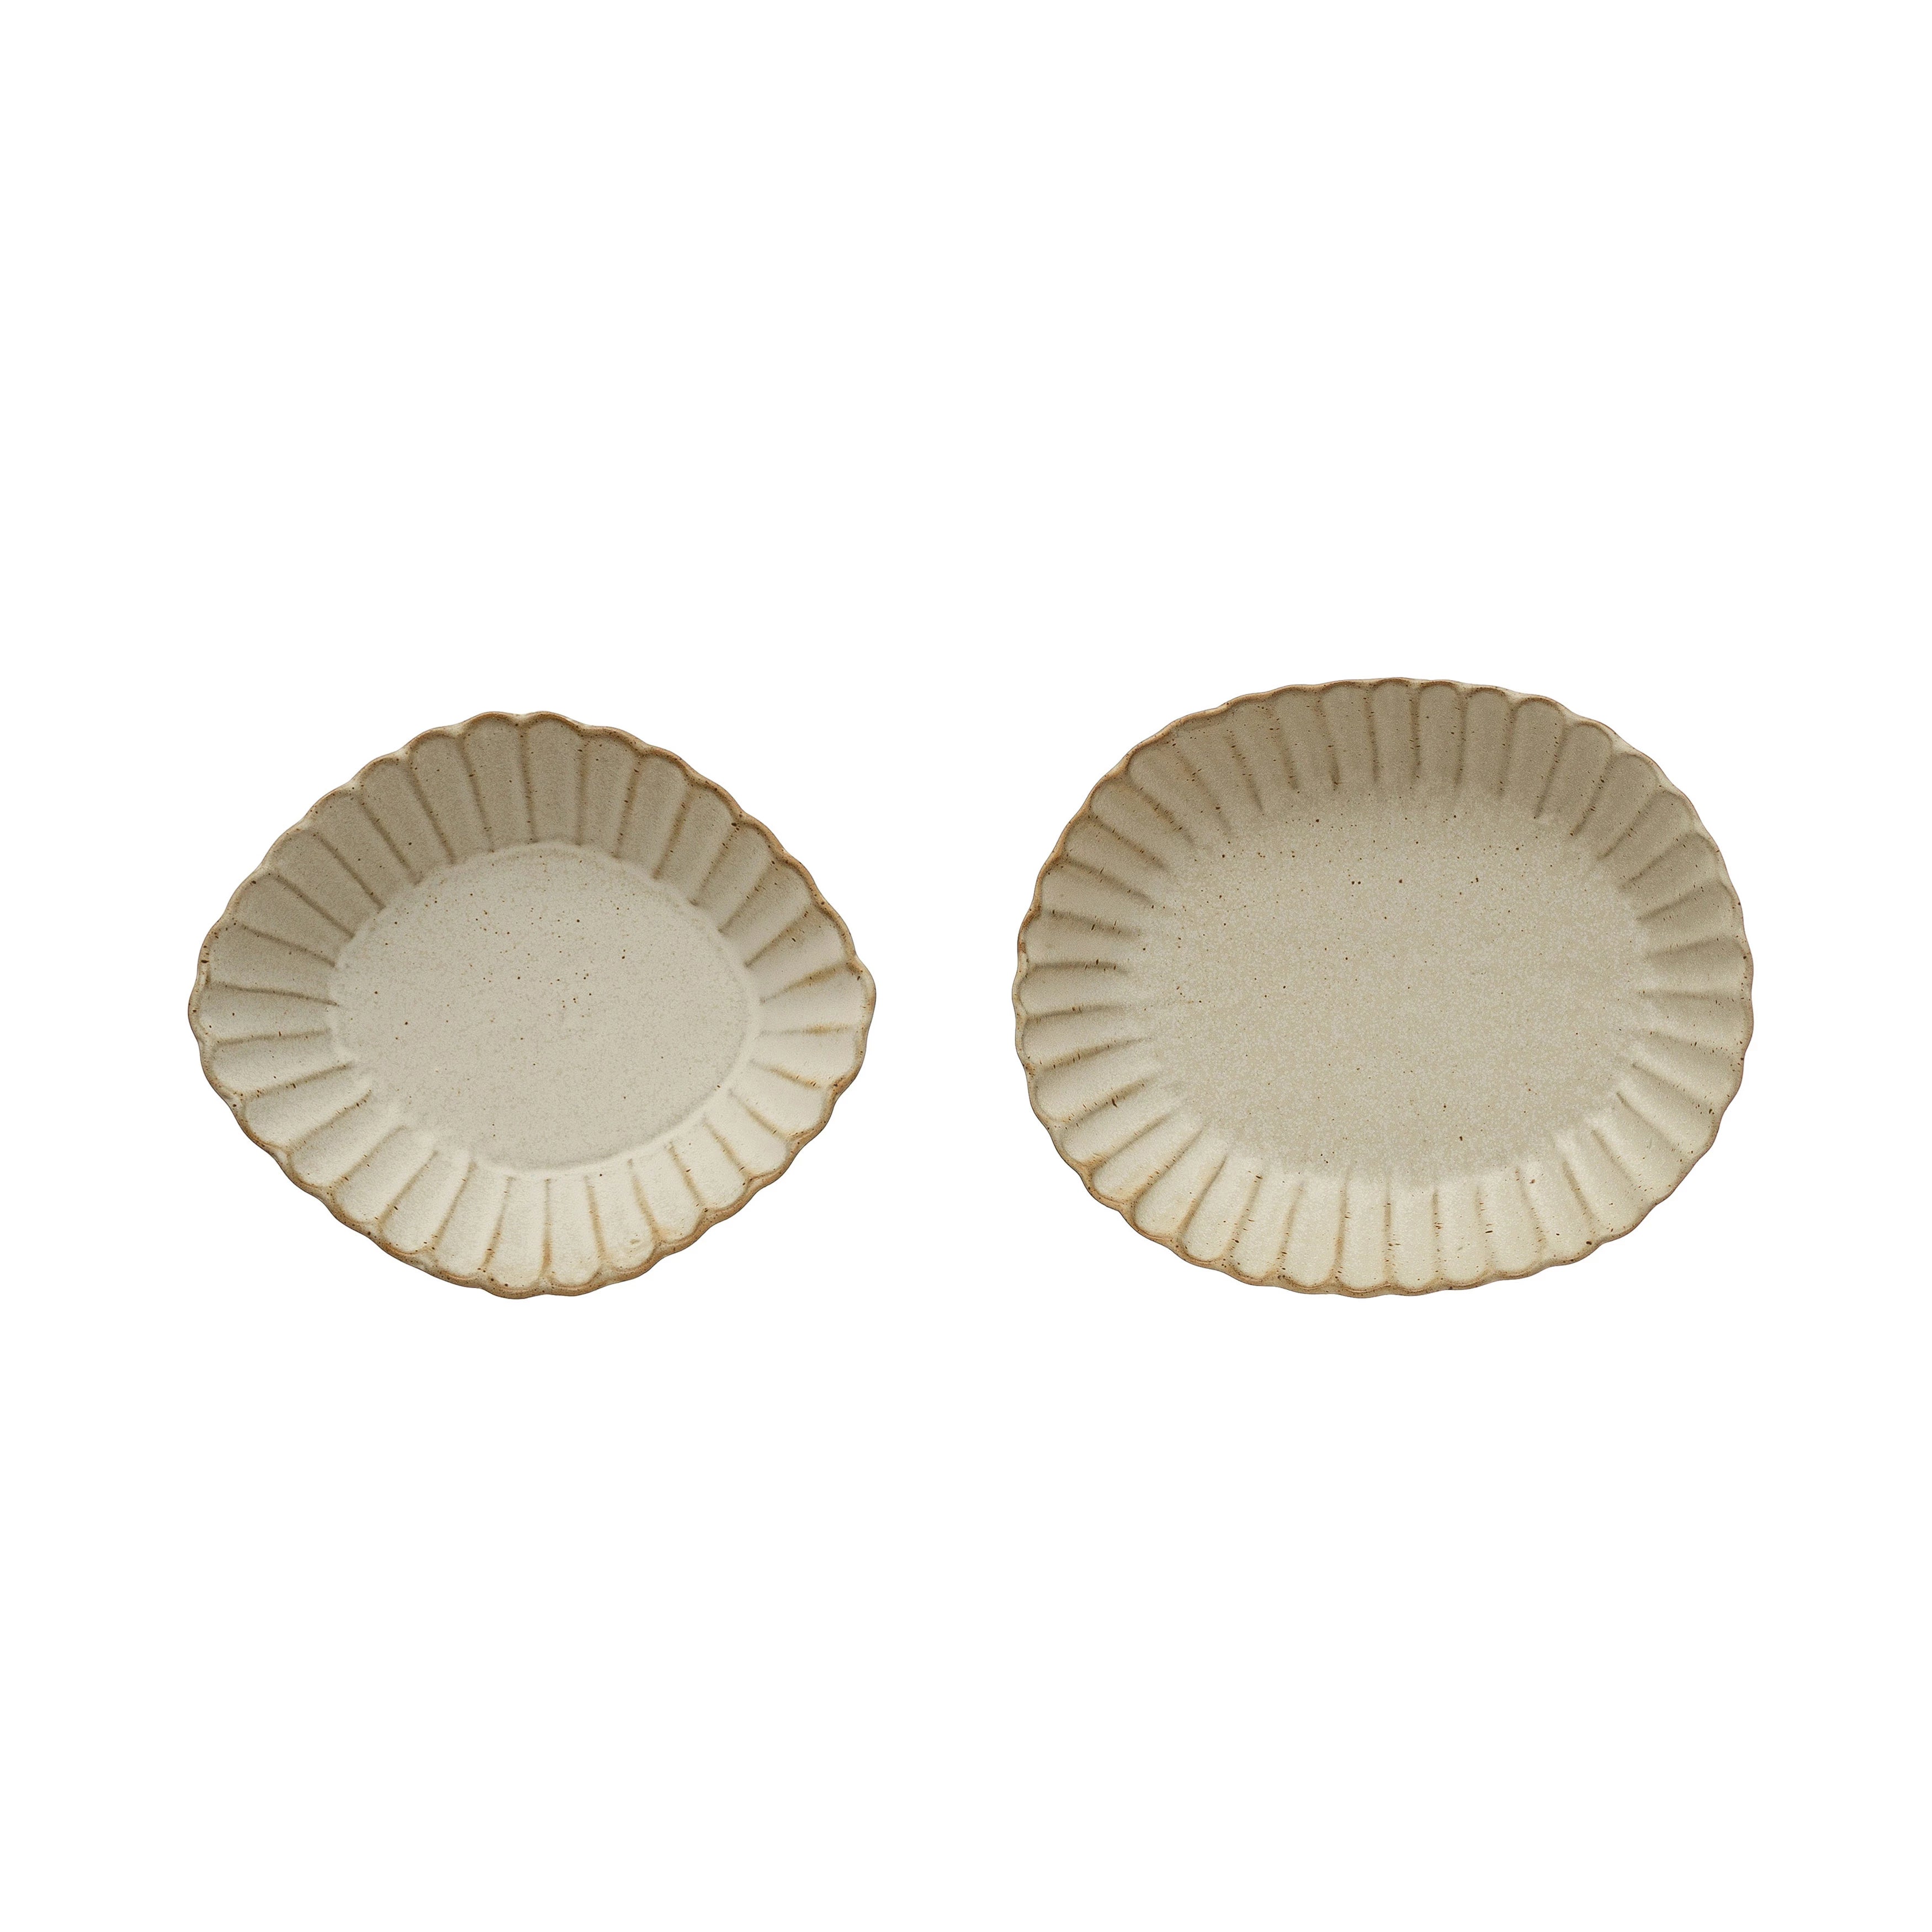 Oval Stoneware Dish with Scalloped Edge